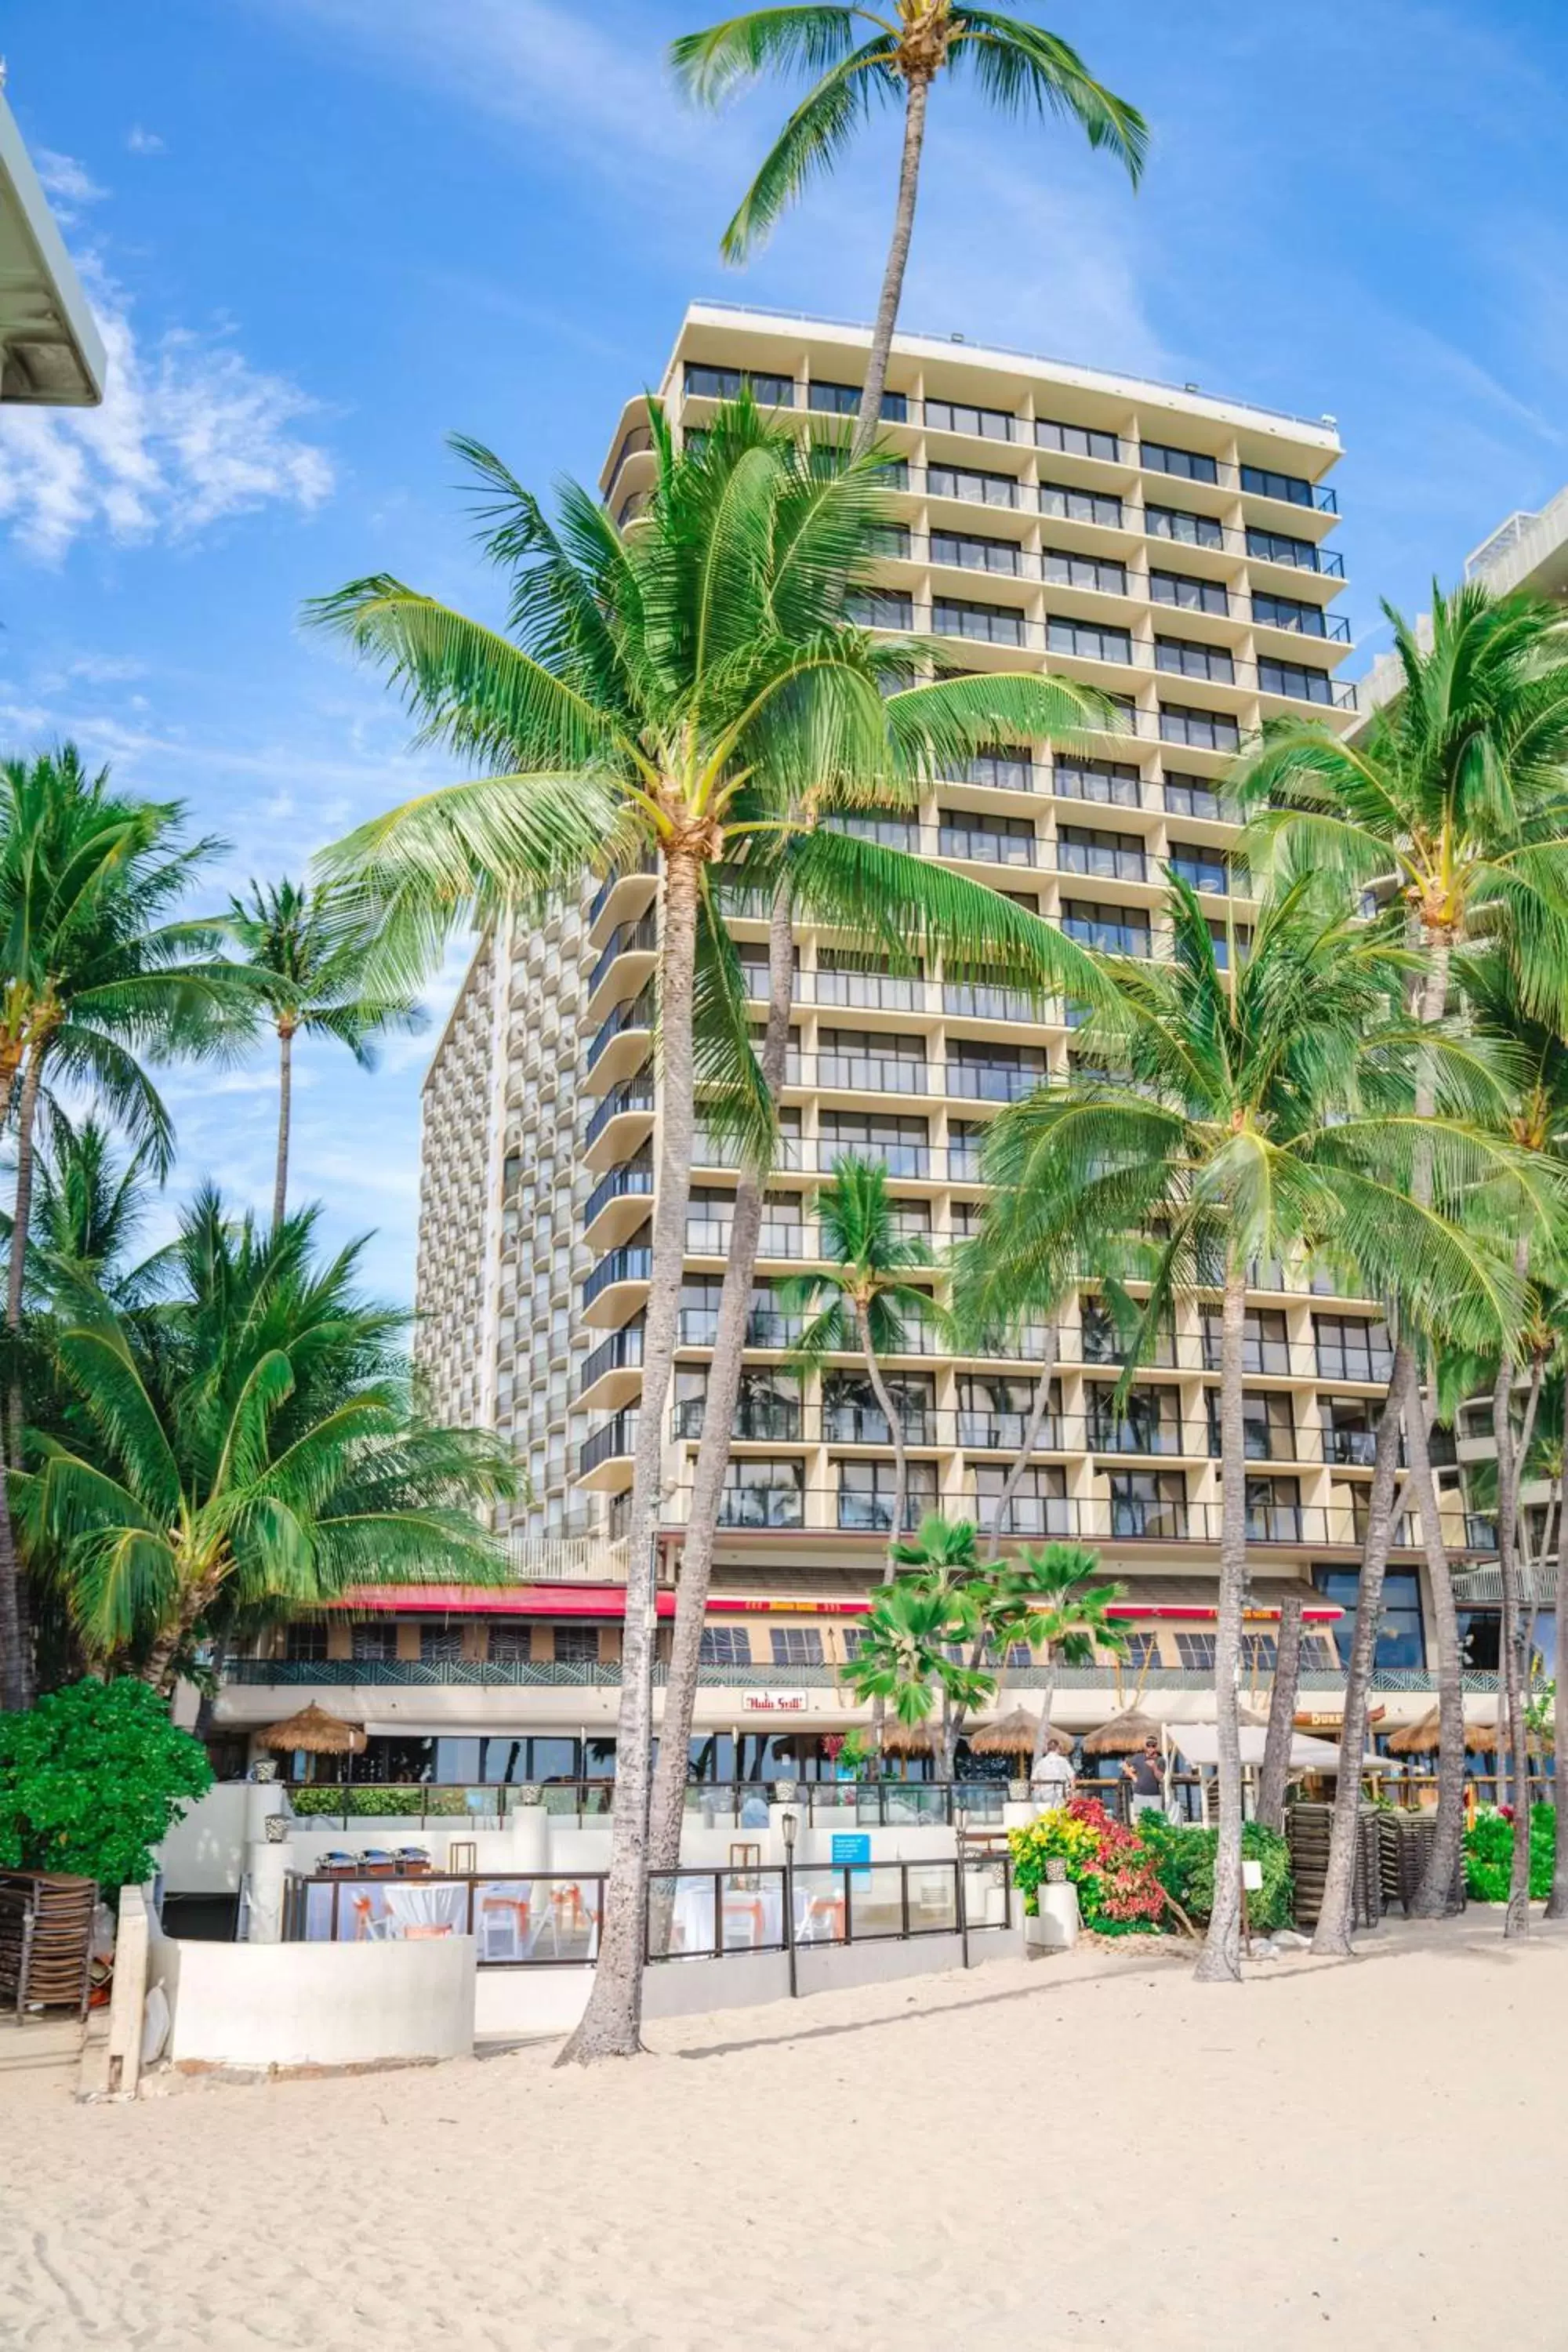 Property Building in OUTRIGGER Waikiki Beach Resort